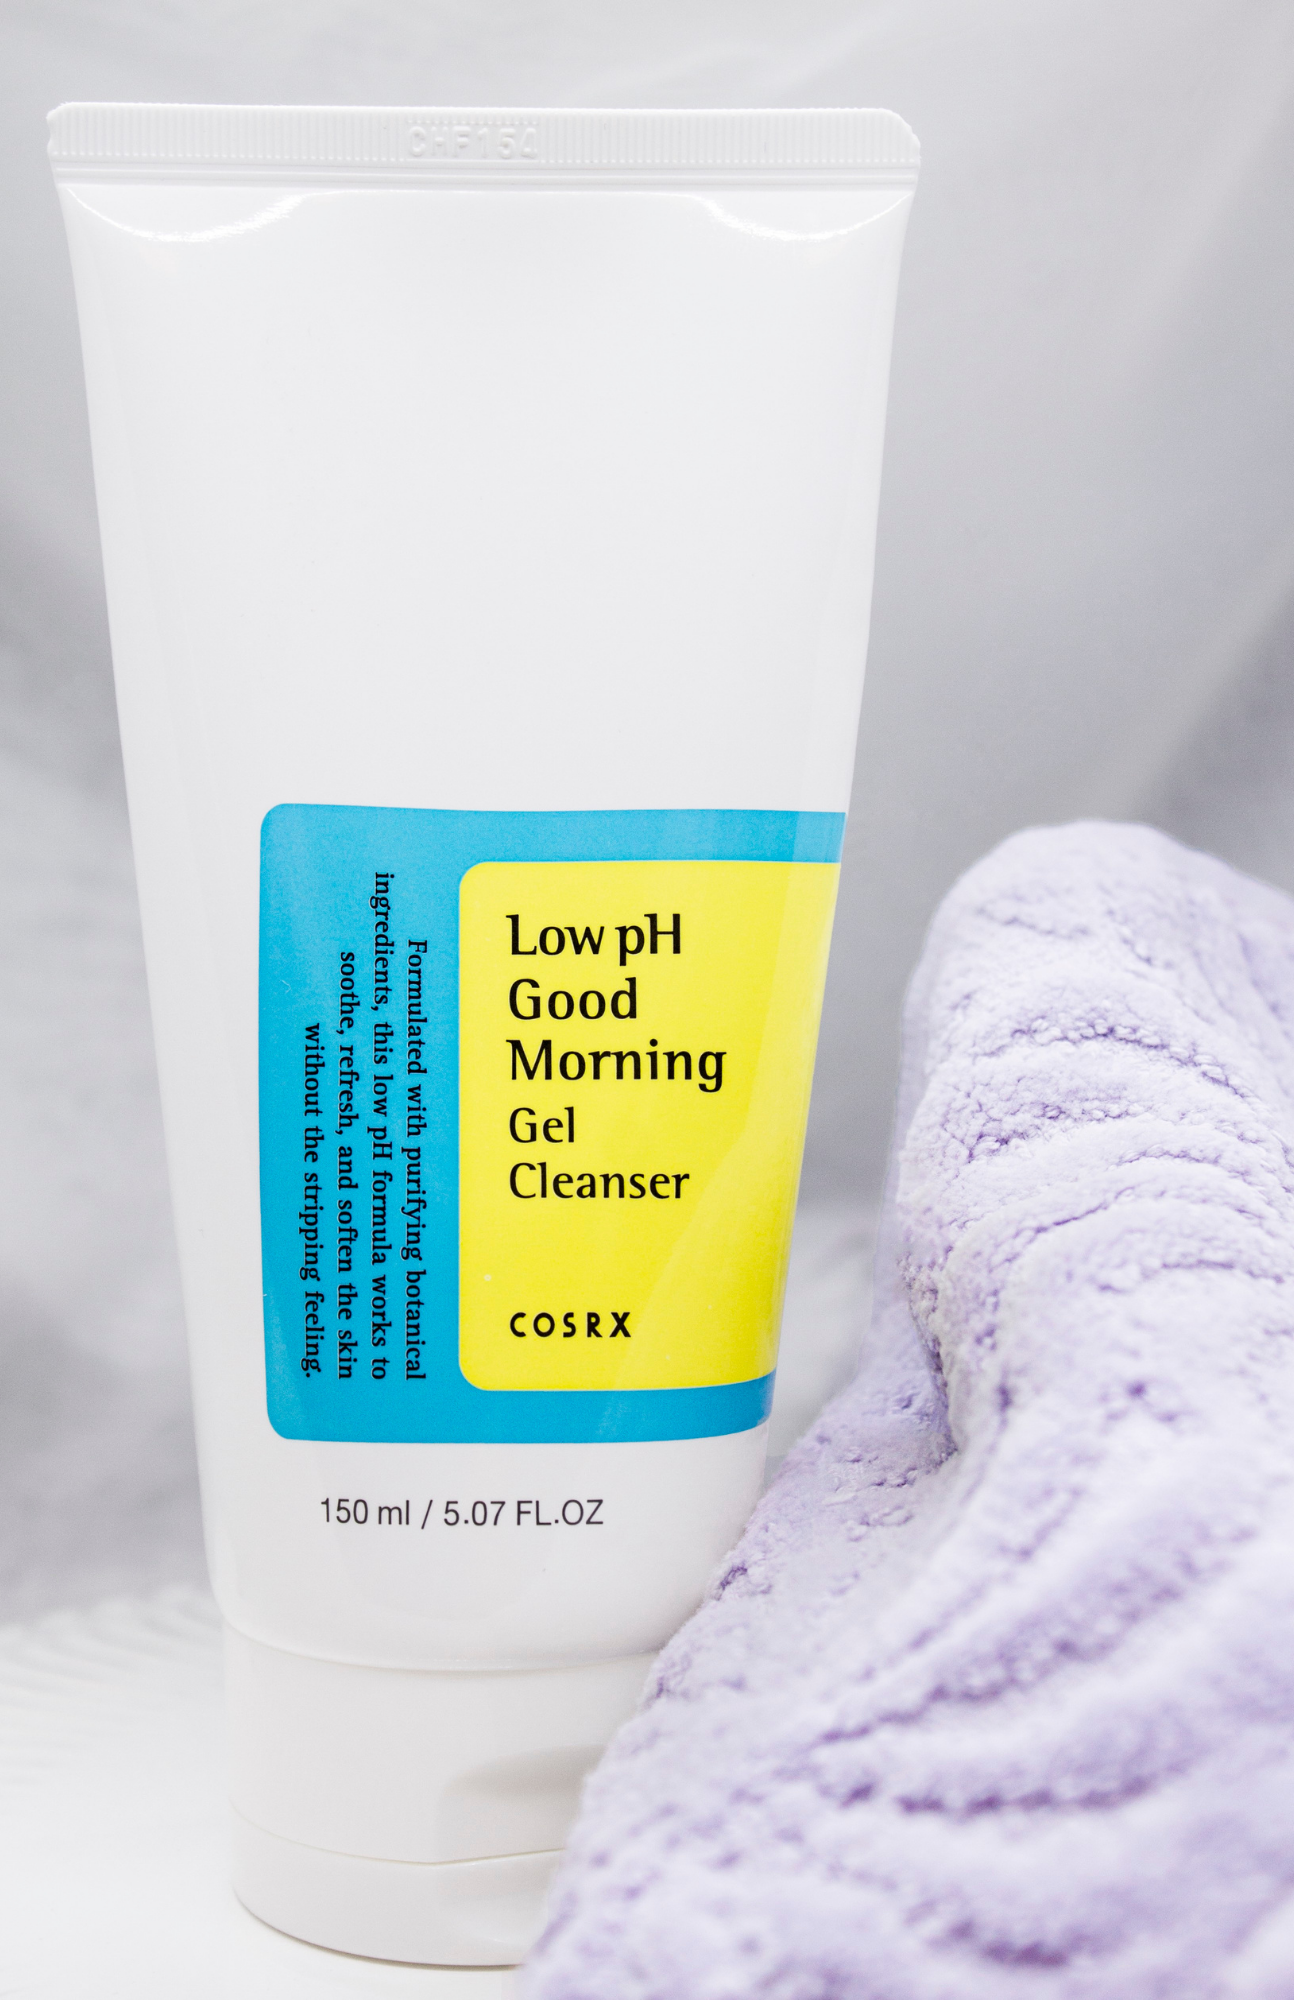 CosRX Low pH Good Morning Gel Cleanser in its beautifully designed packaging, promoting radiant skin.